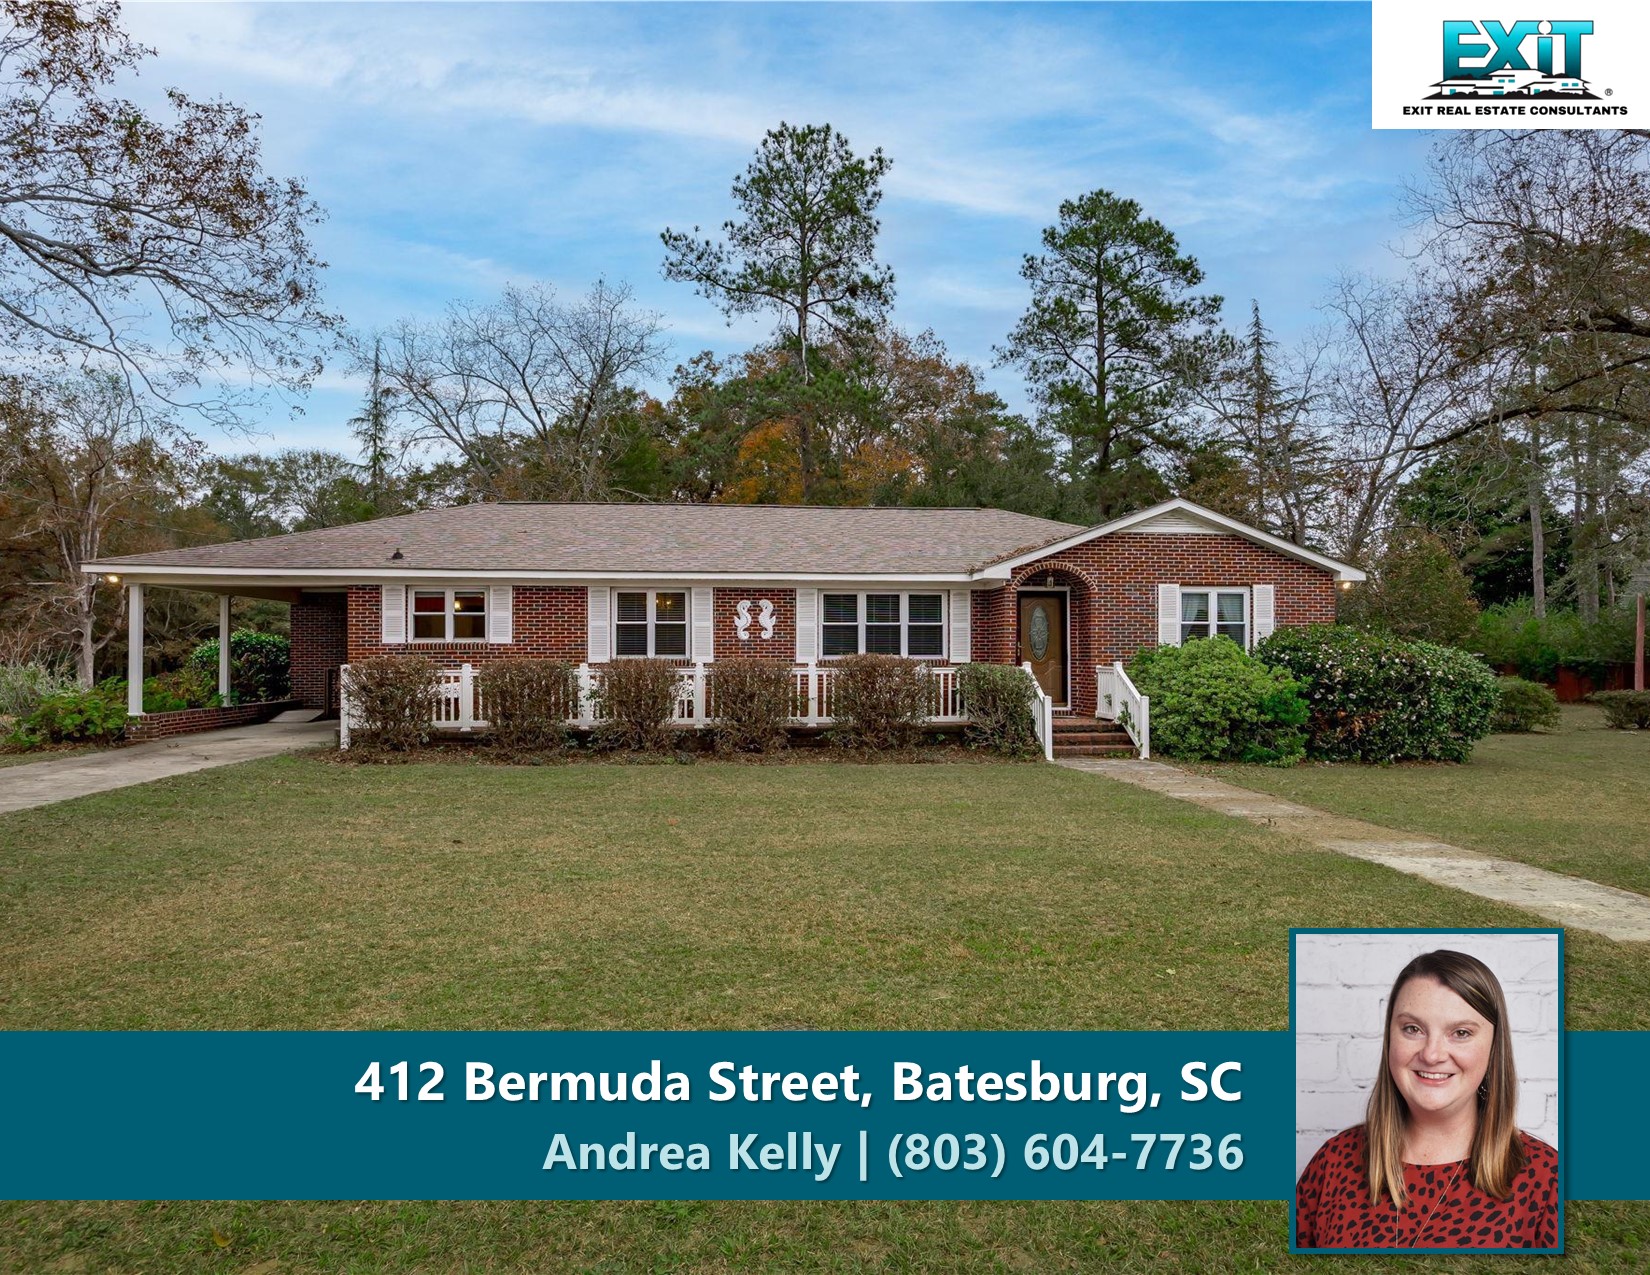 Just listed in Batesburg